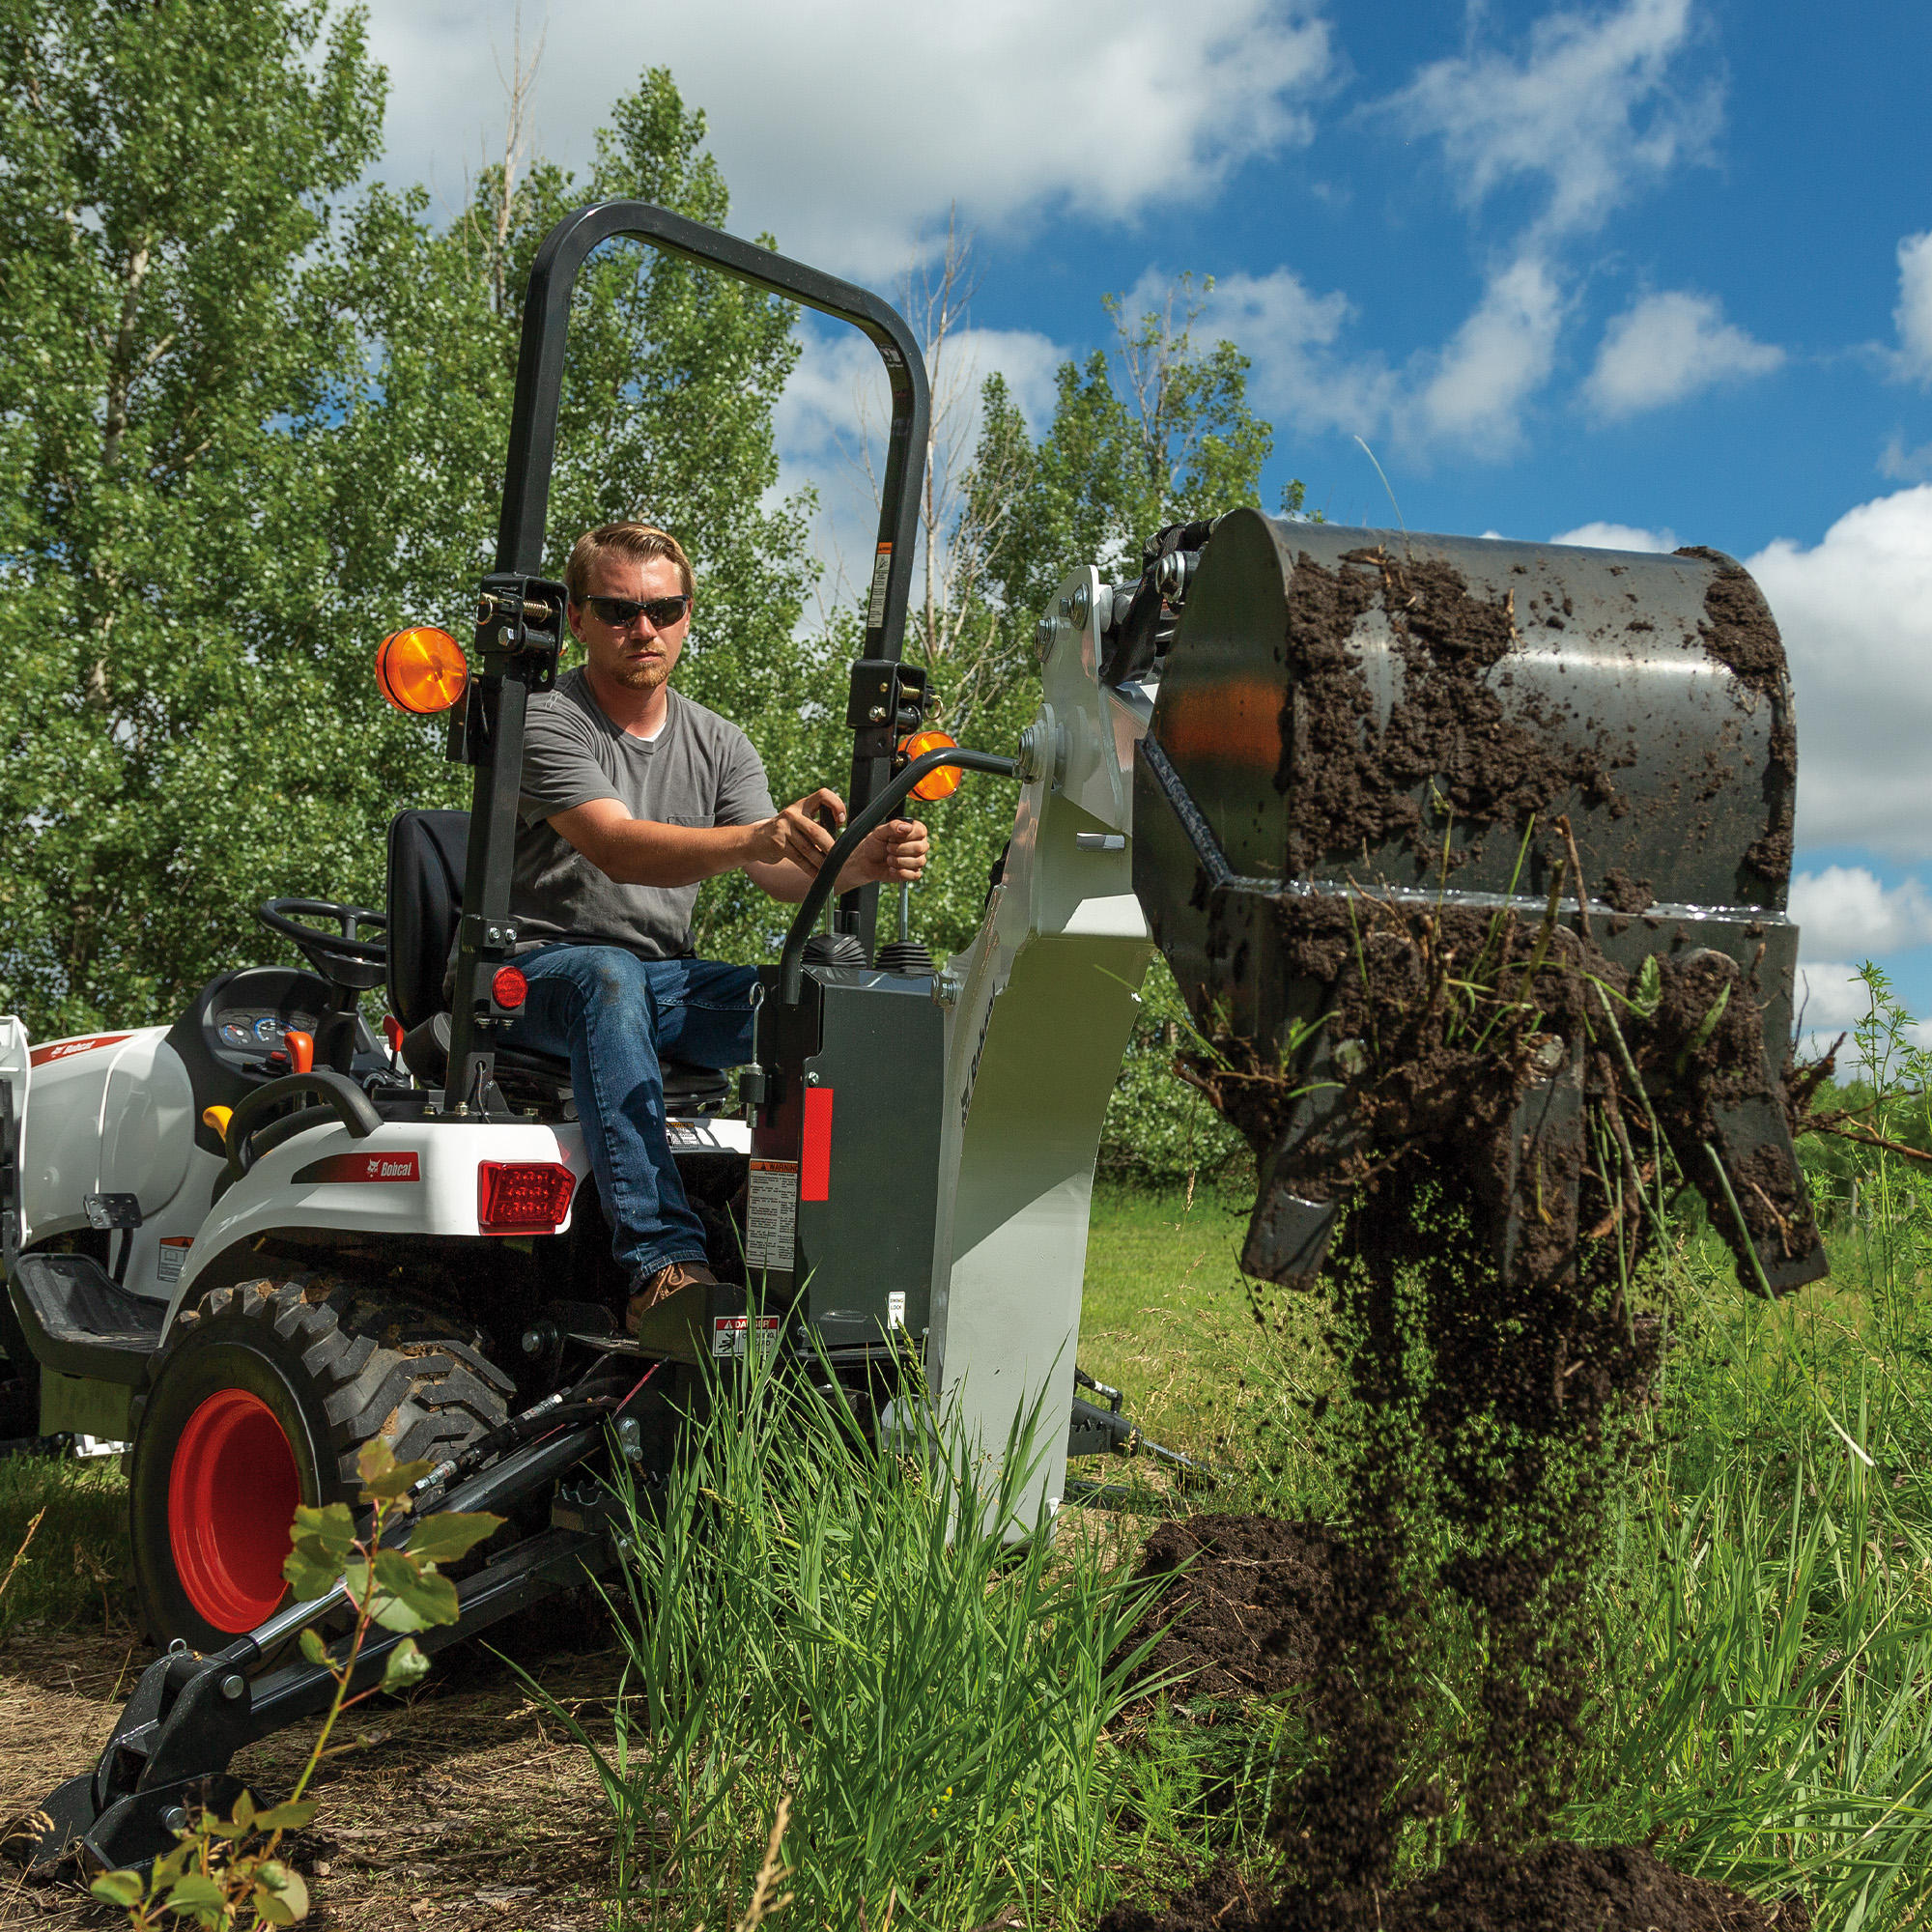 The Bobcat CT1021 compact tractor and backhoe implement Bobcat of Fort McMurray Fort Mcmurray (780)714-9200